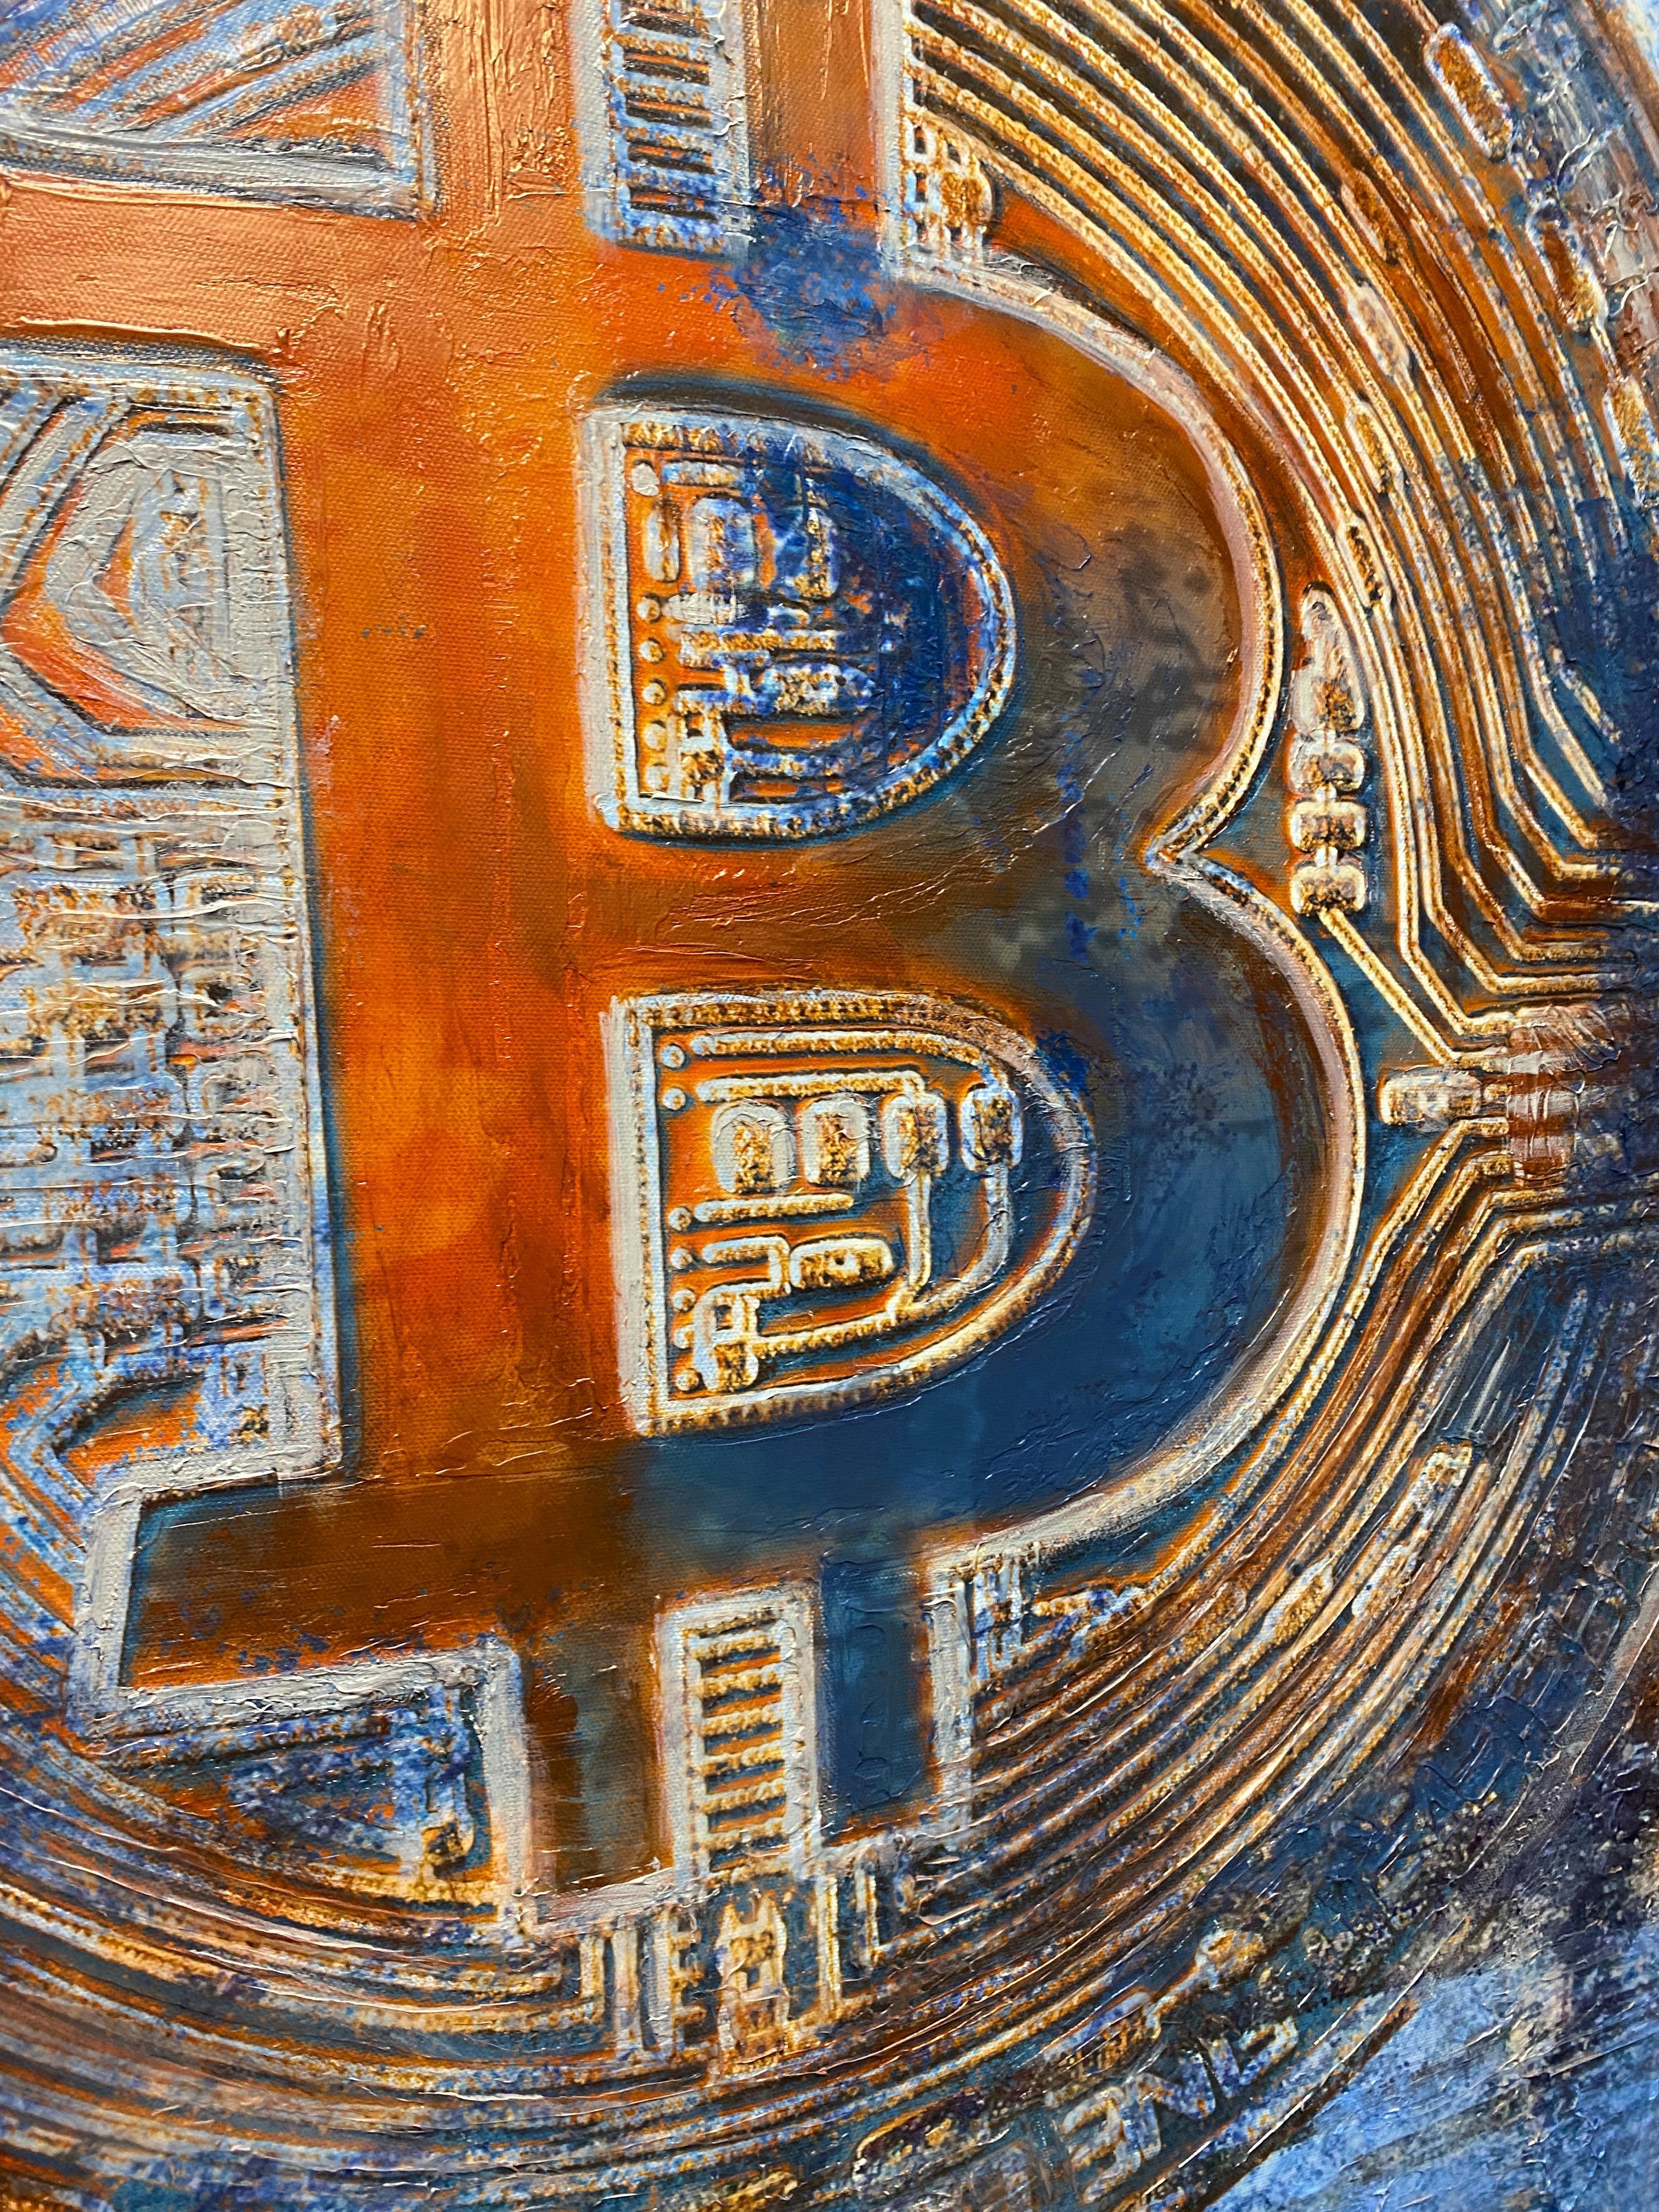 BTC, Bitcoin Abstract Canvas Art, Cryptocurrency Bitcoin Painting H48